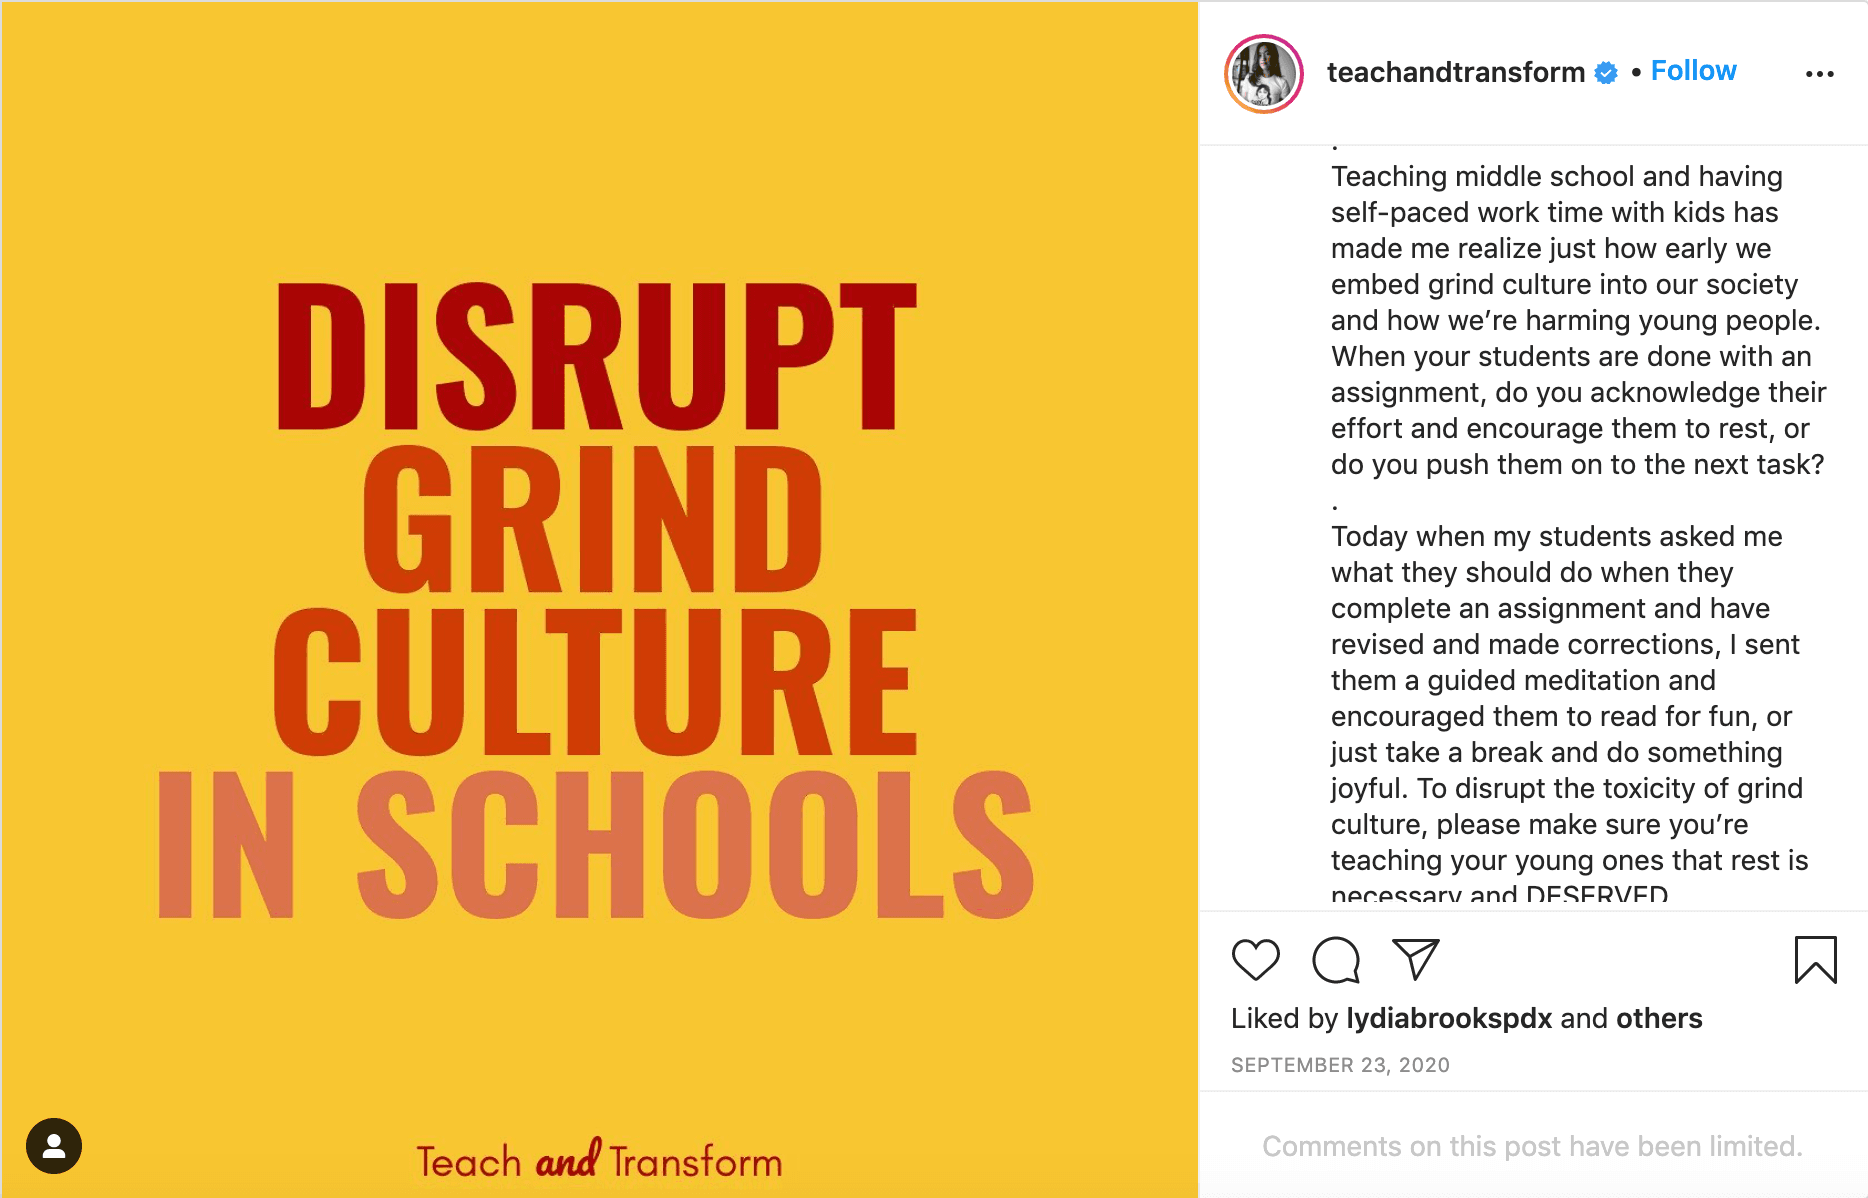 An Instagram post from Liz Kleinrock that says, "Disrupt Grind Culture In Schools." An excerpt from the caption says, "Teaching middle school and having self-paced work time with kids has made me realize just how early we embed grind culture into our society and how we're harming young people. When your students are done with an assignment, do you acknowledge their effort and encourage them to rest, or do you push them on to the next task?"